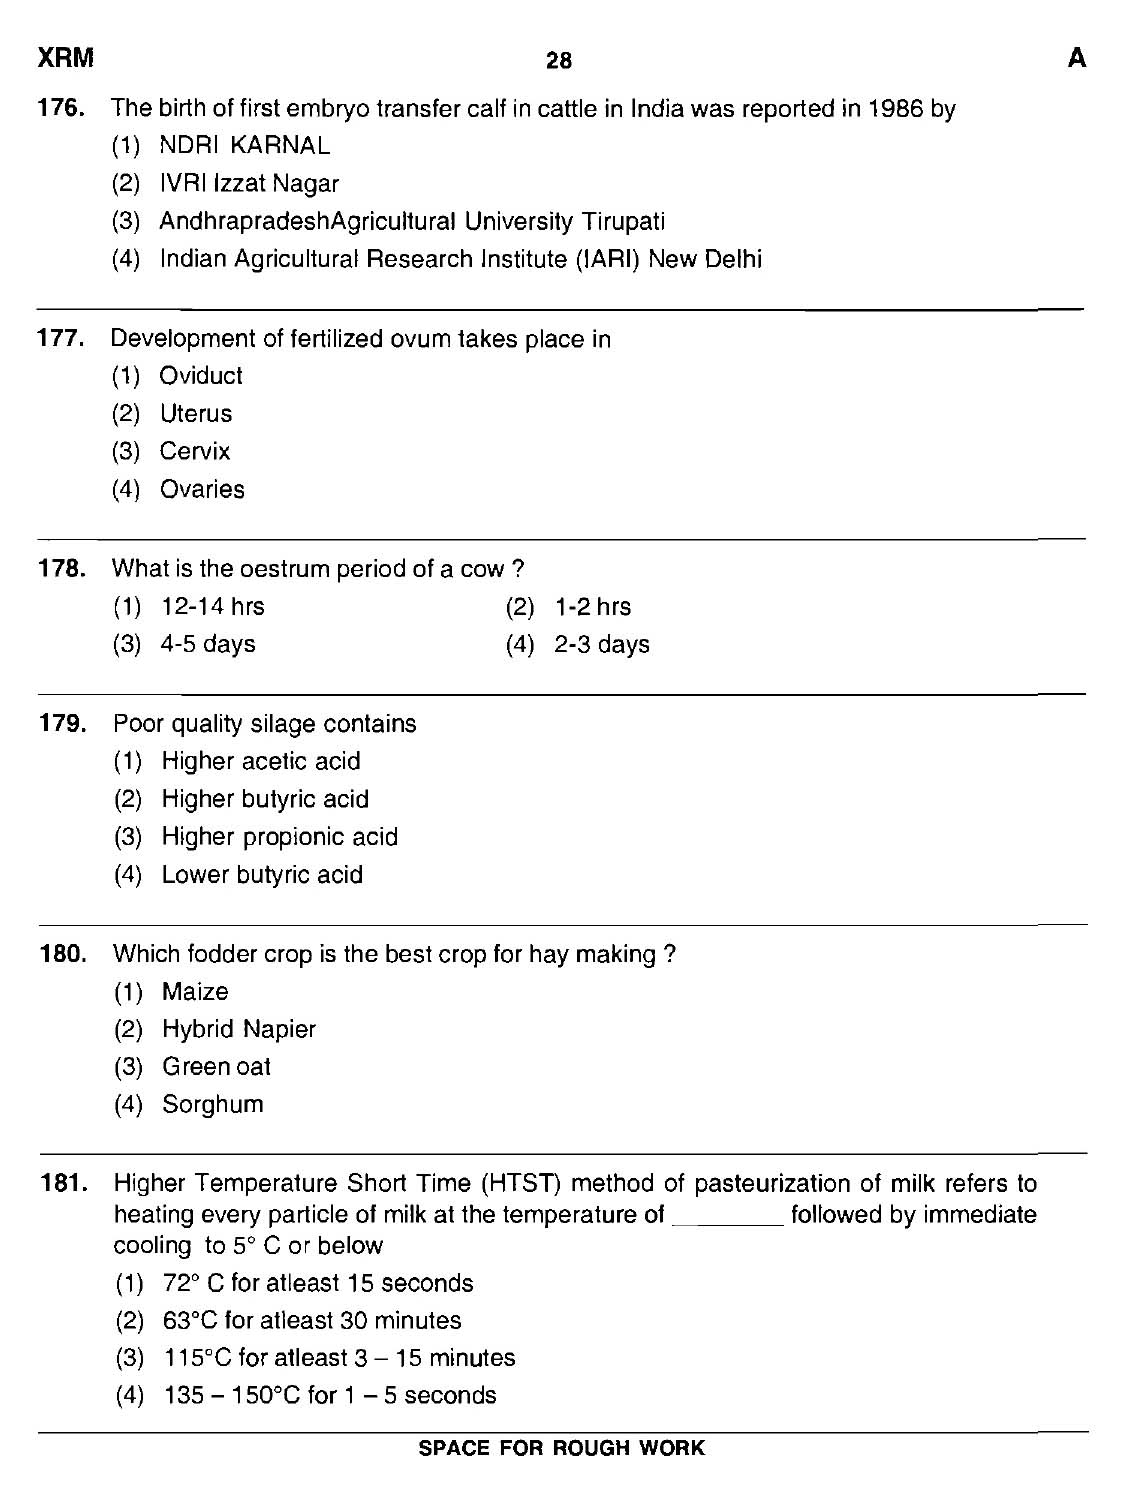 MPSC Agricultural Services Main Exam 2011 Question Paper Agriculture 26